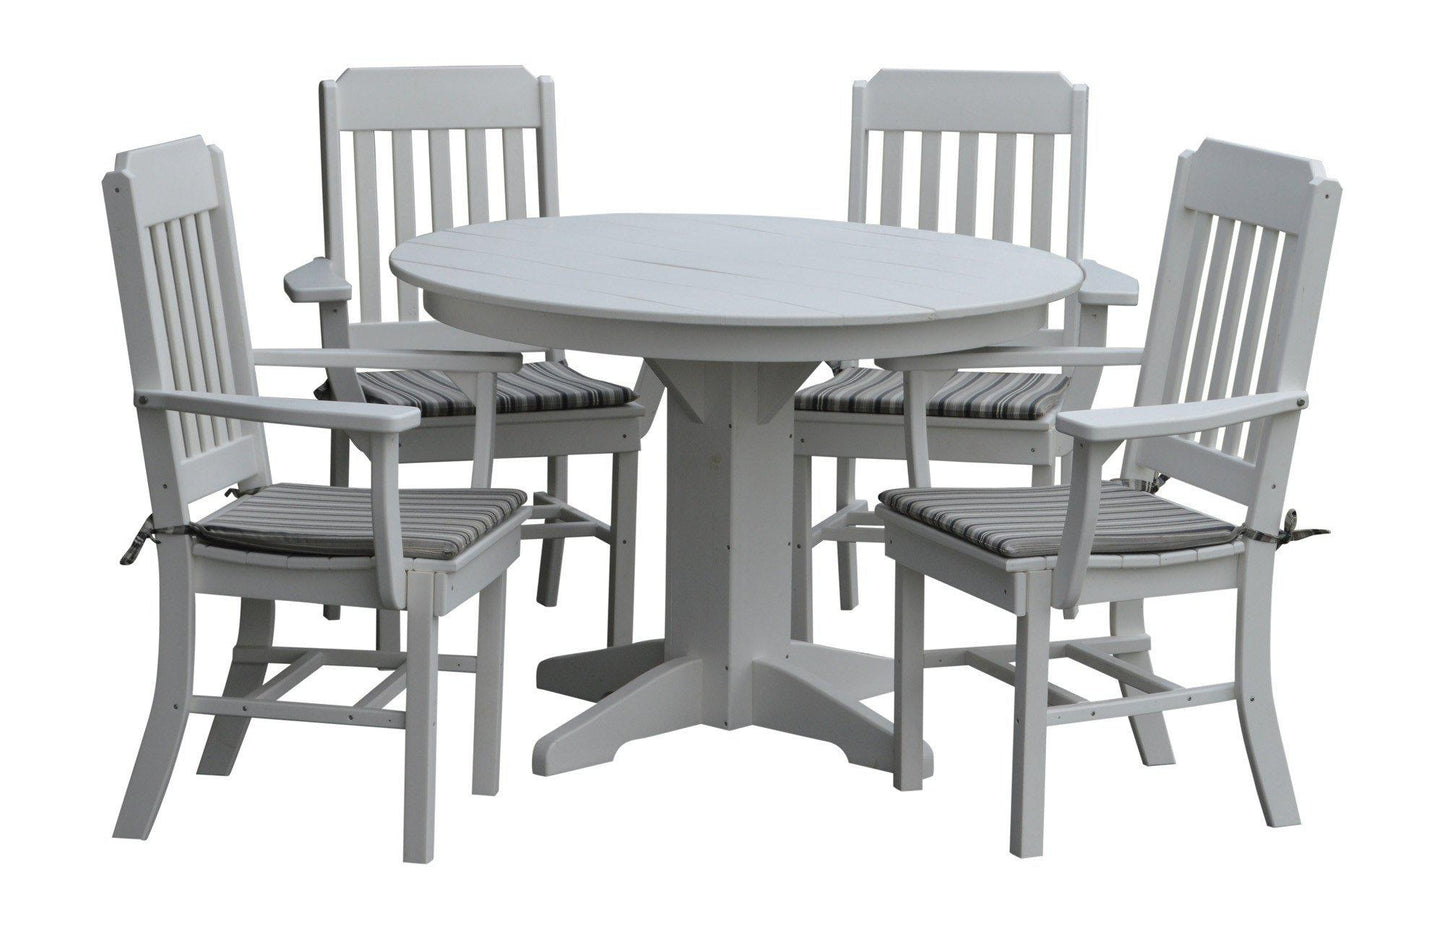 A&L Furniture Recycled Plastic Round Table with Traditional Dining Chairs w/ Arms Dining Set - White